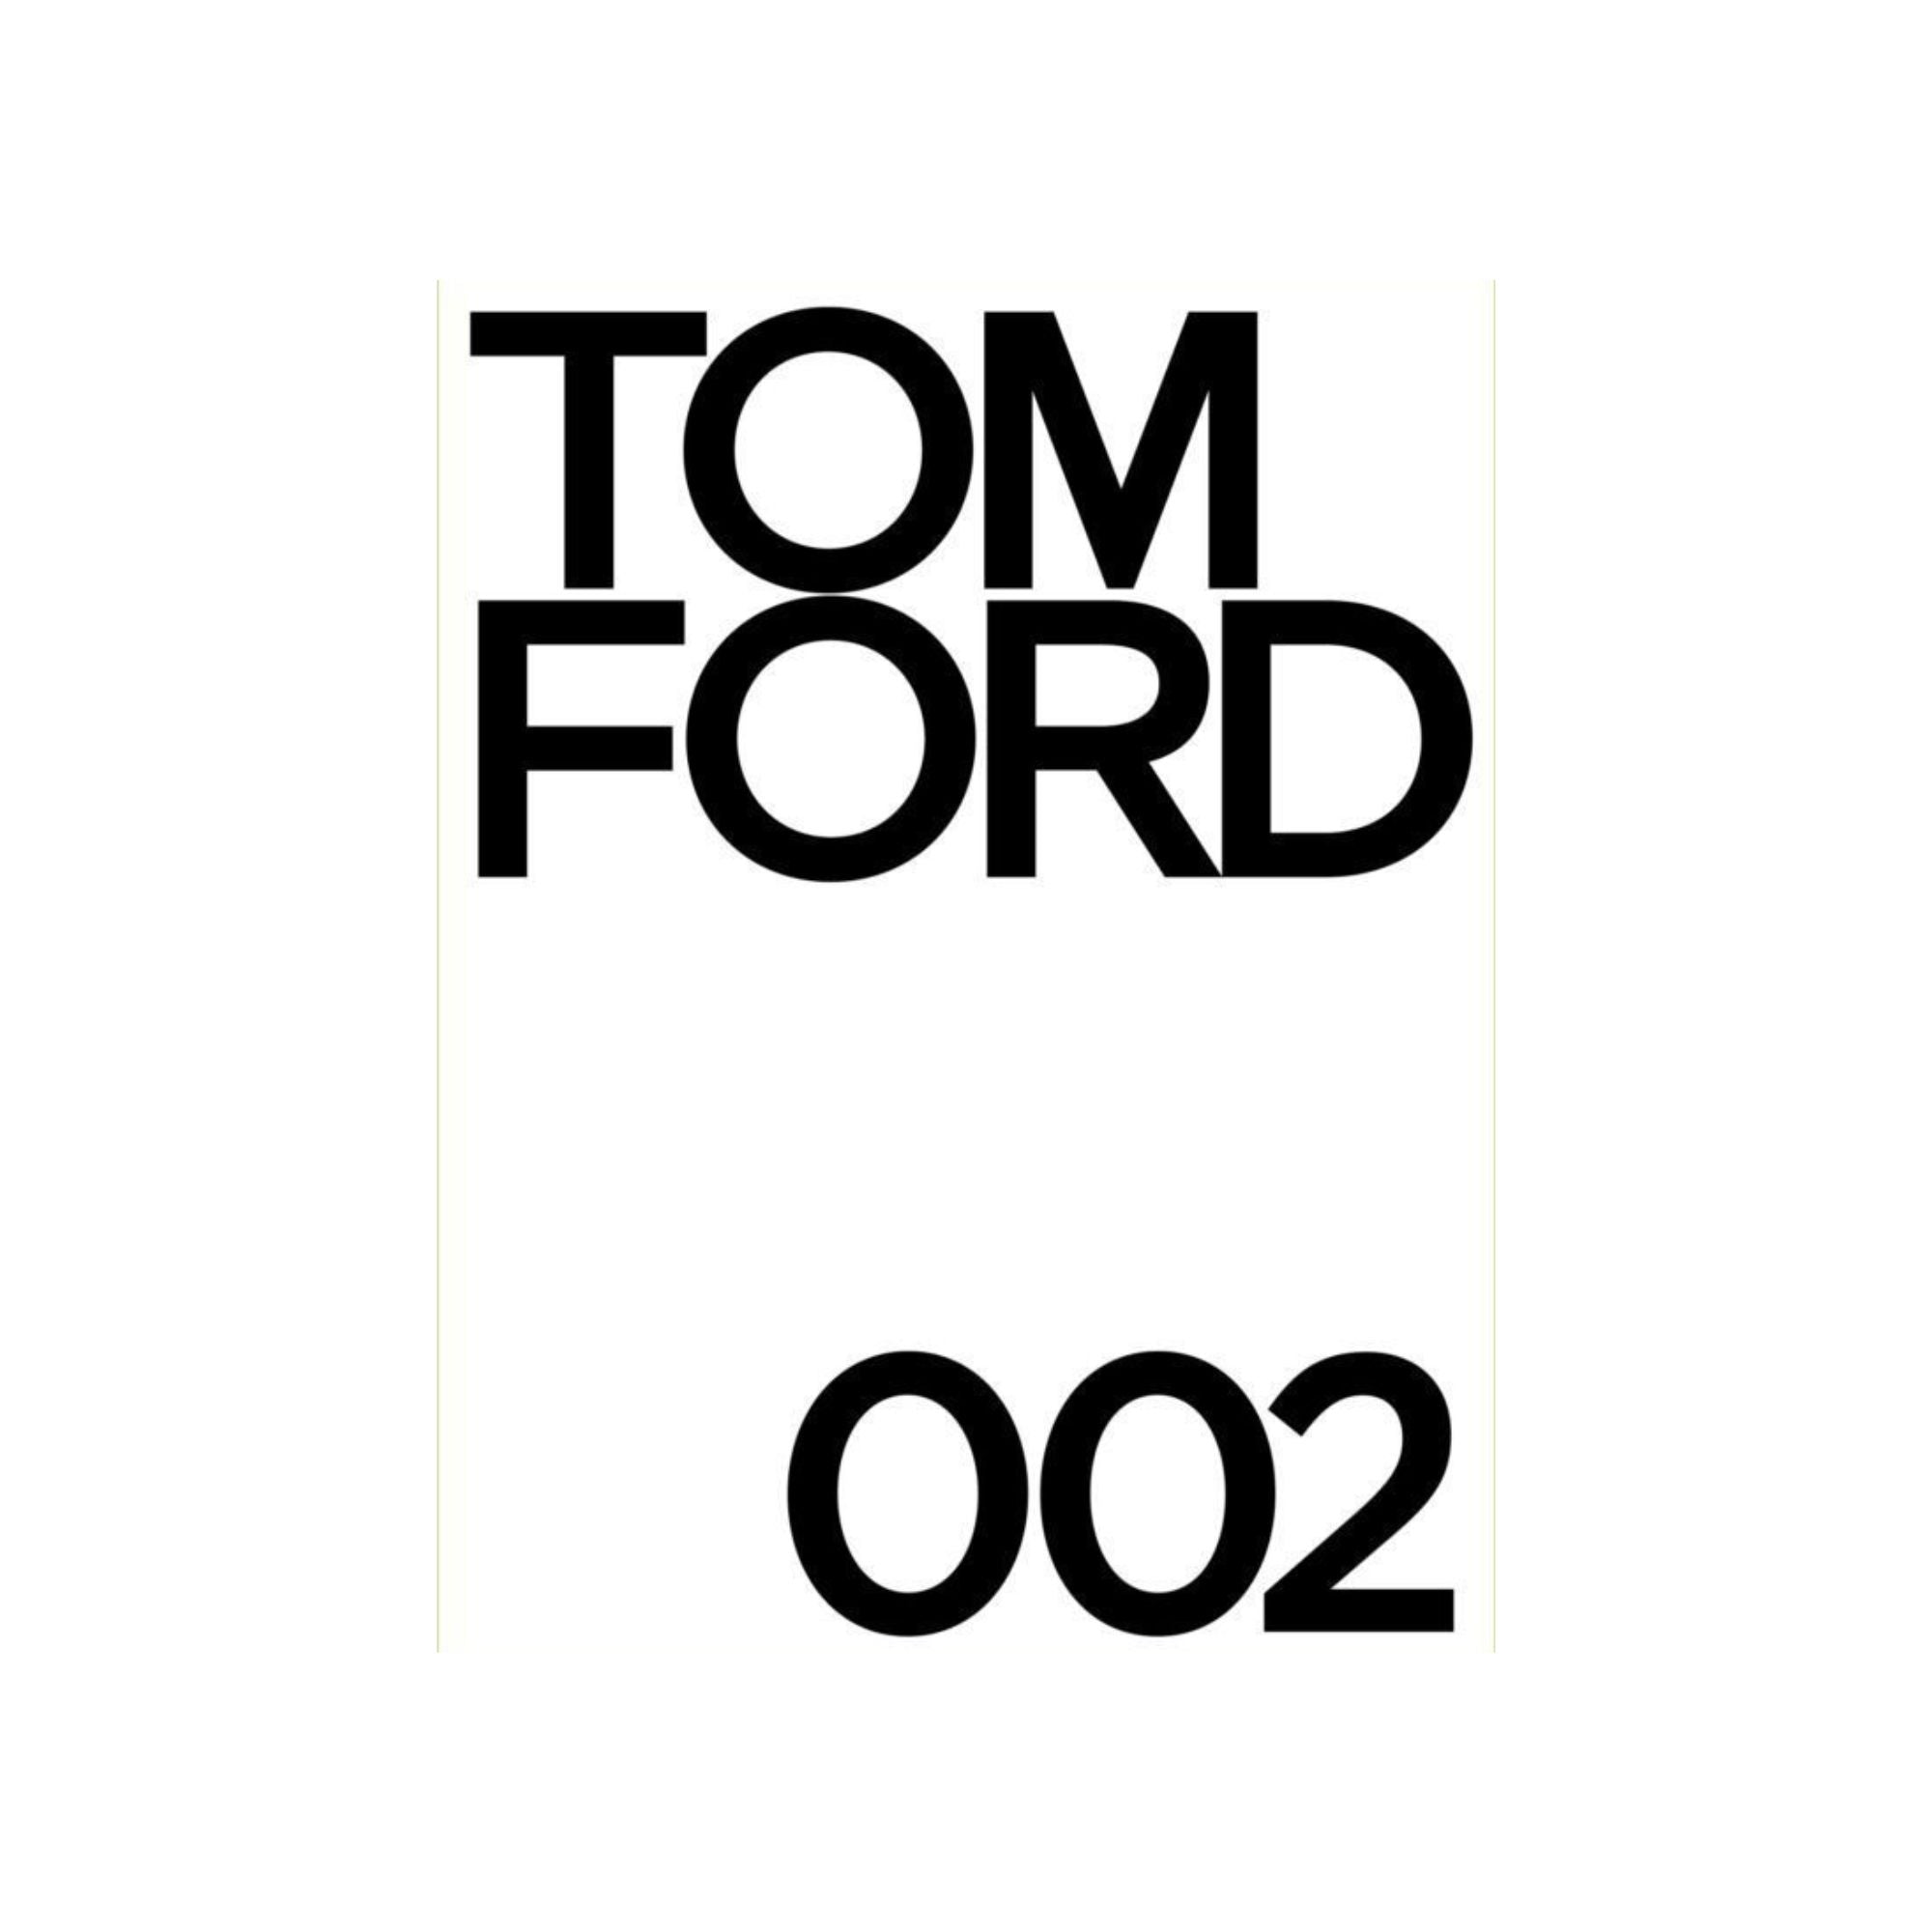 Tom Ford 002 - THAT COOL LIVING